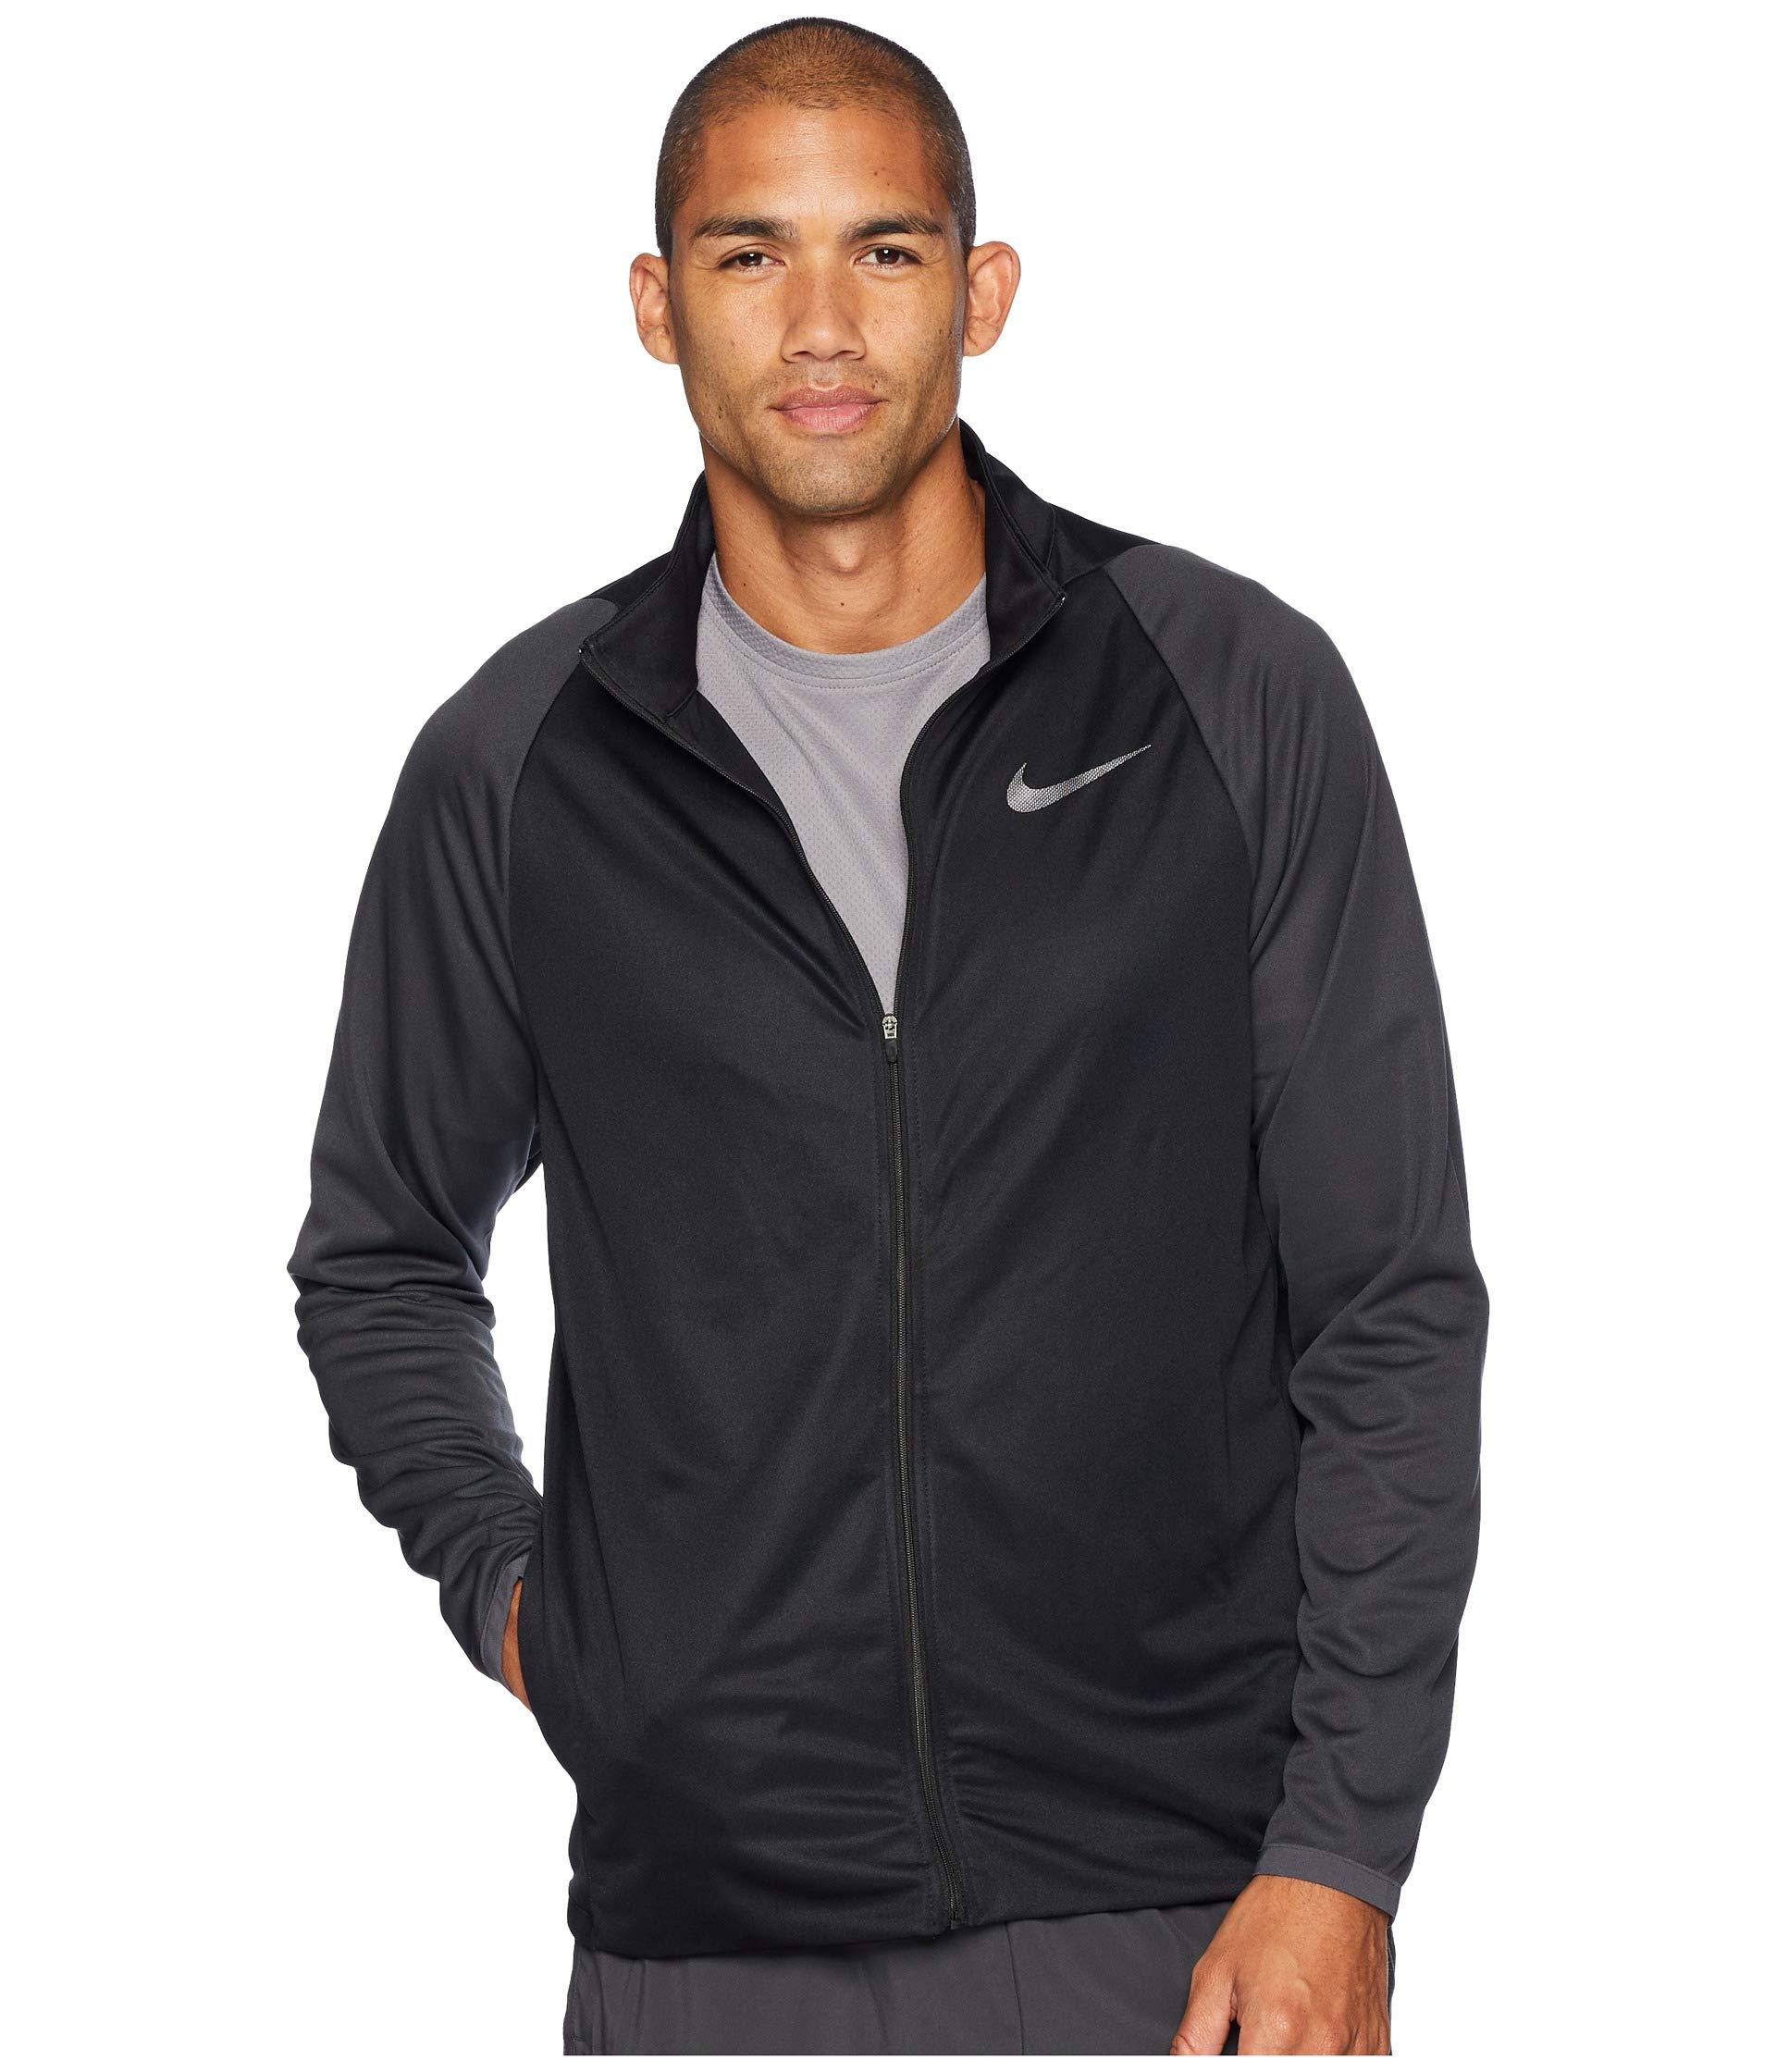 Nike Synthetic Epic Jacket Knit in Black for Men - Lyst